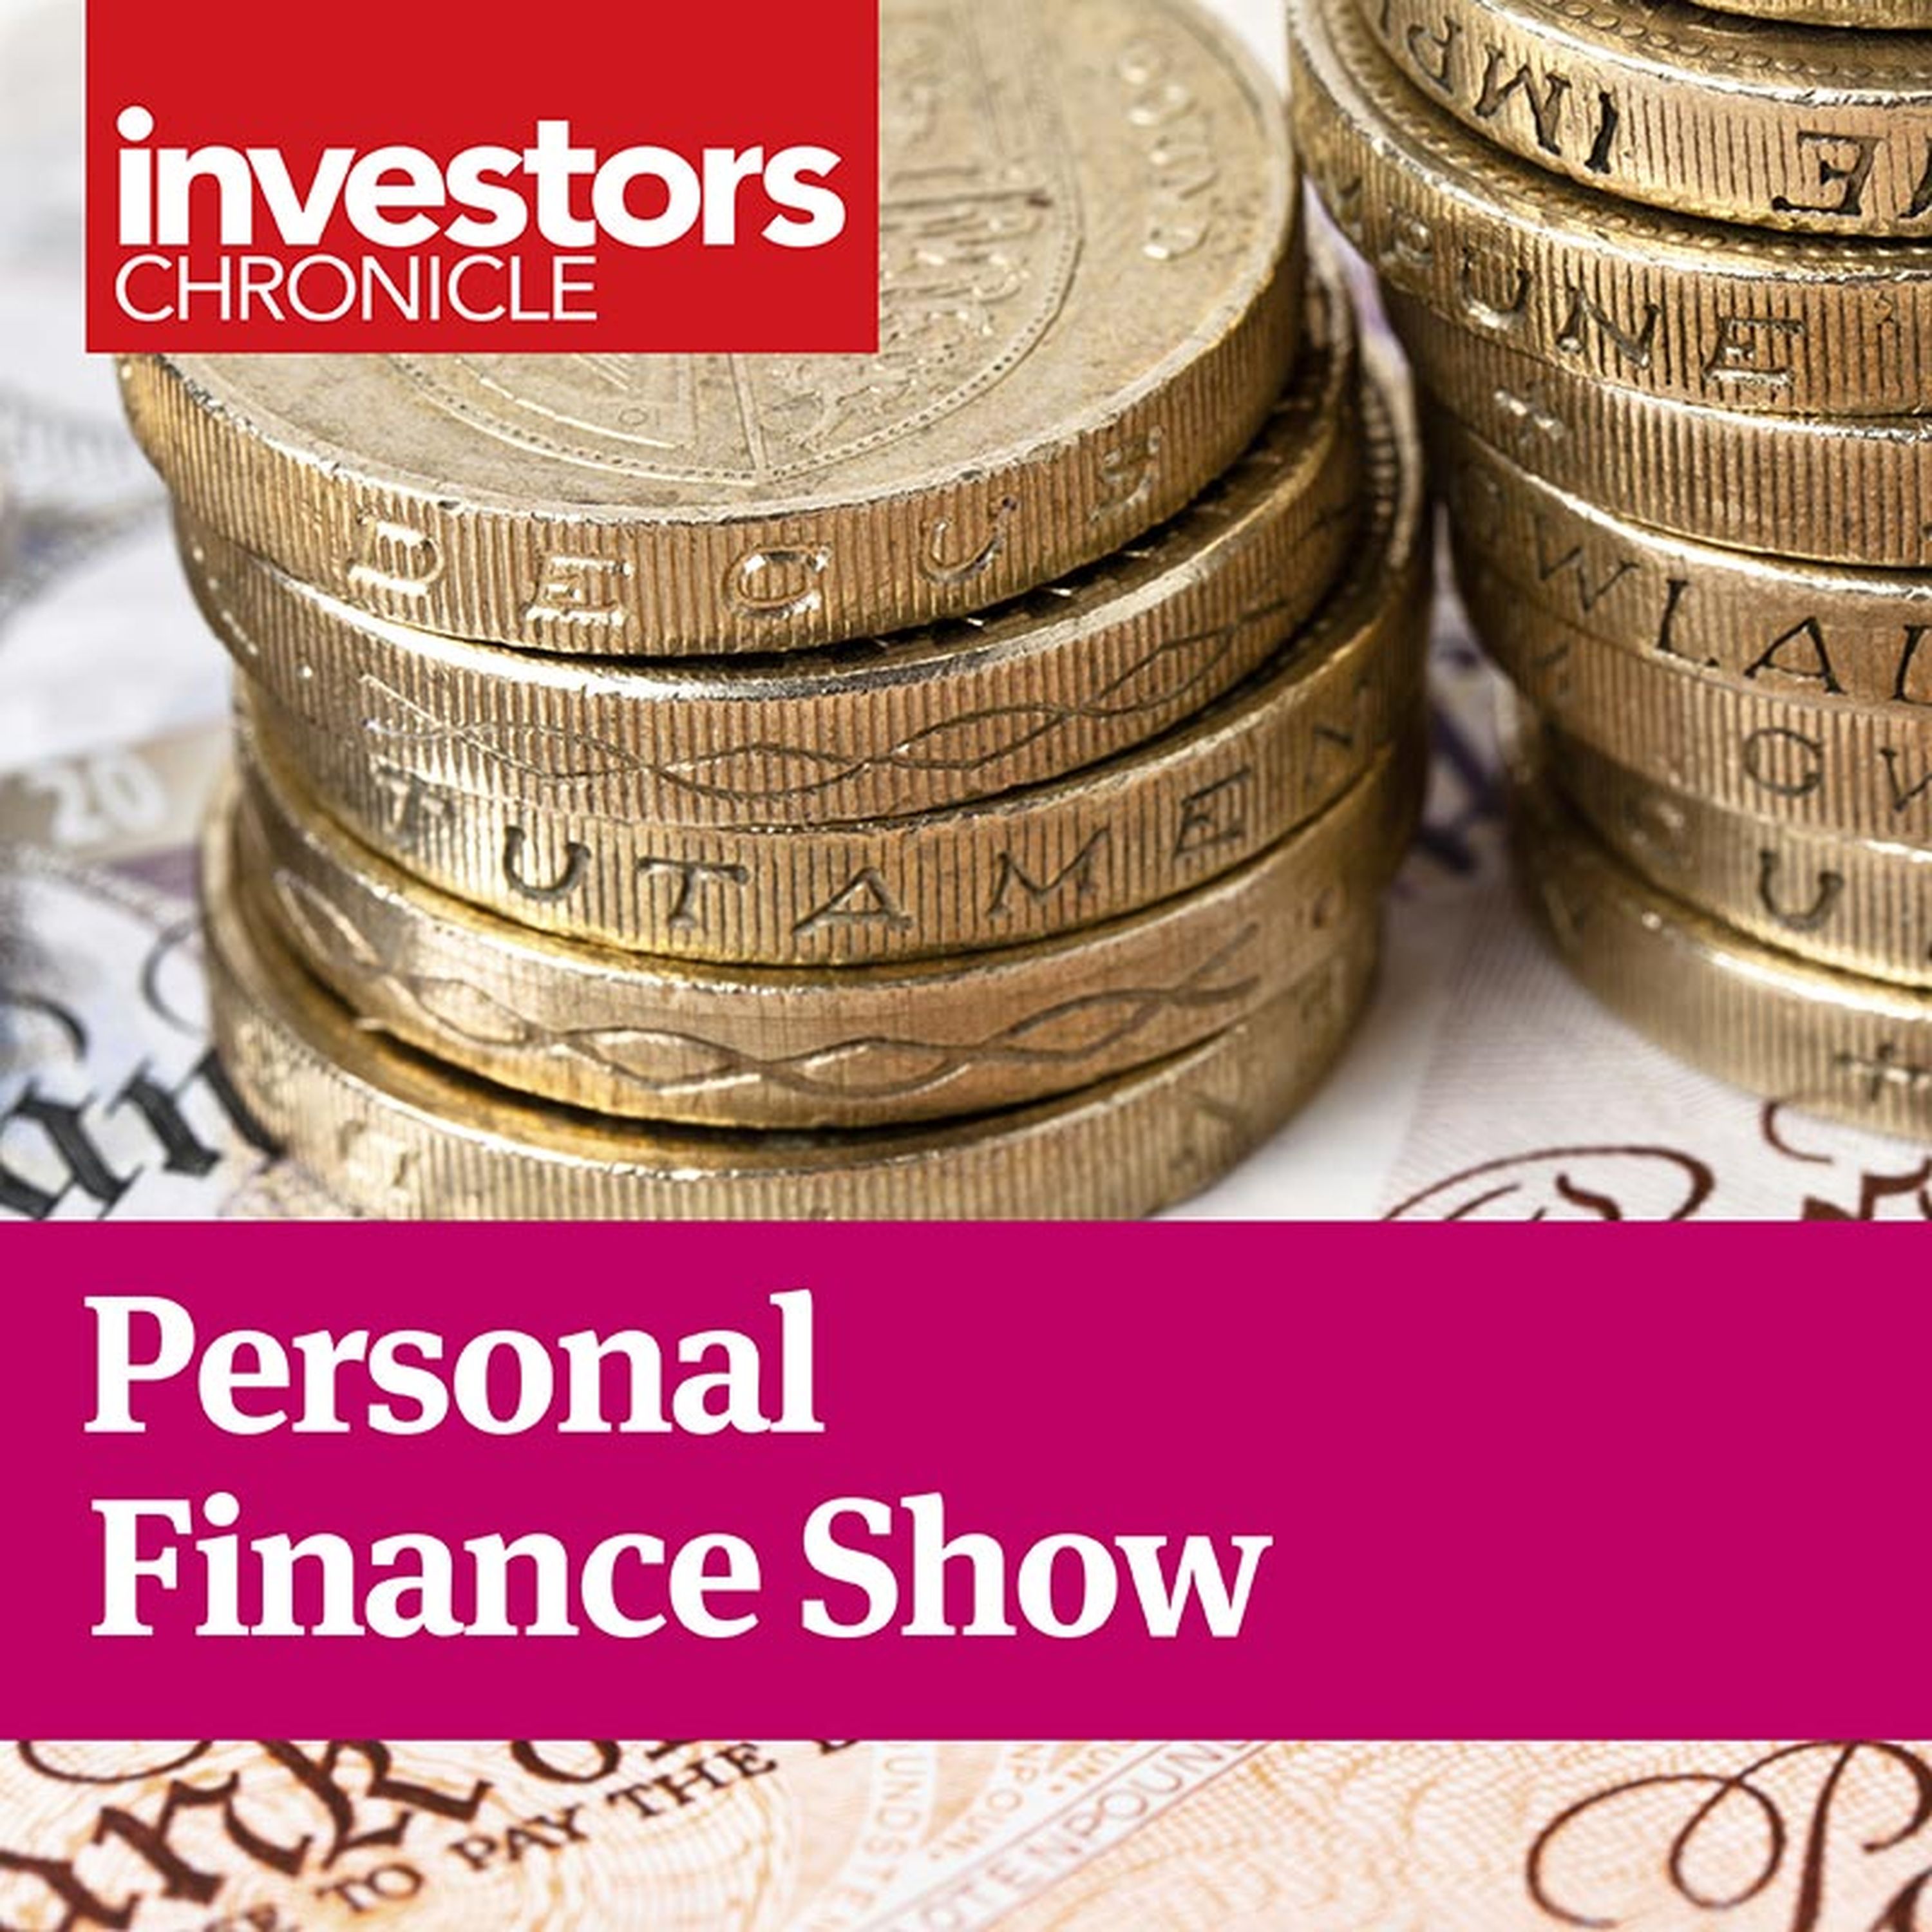 Personal Finance Show 6 May 2016